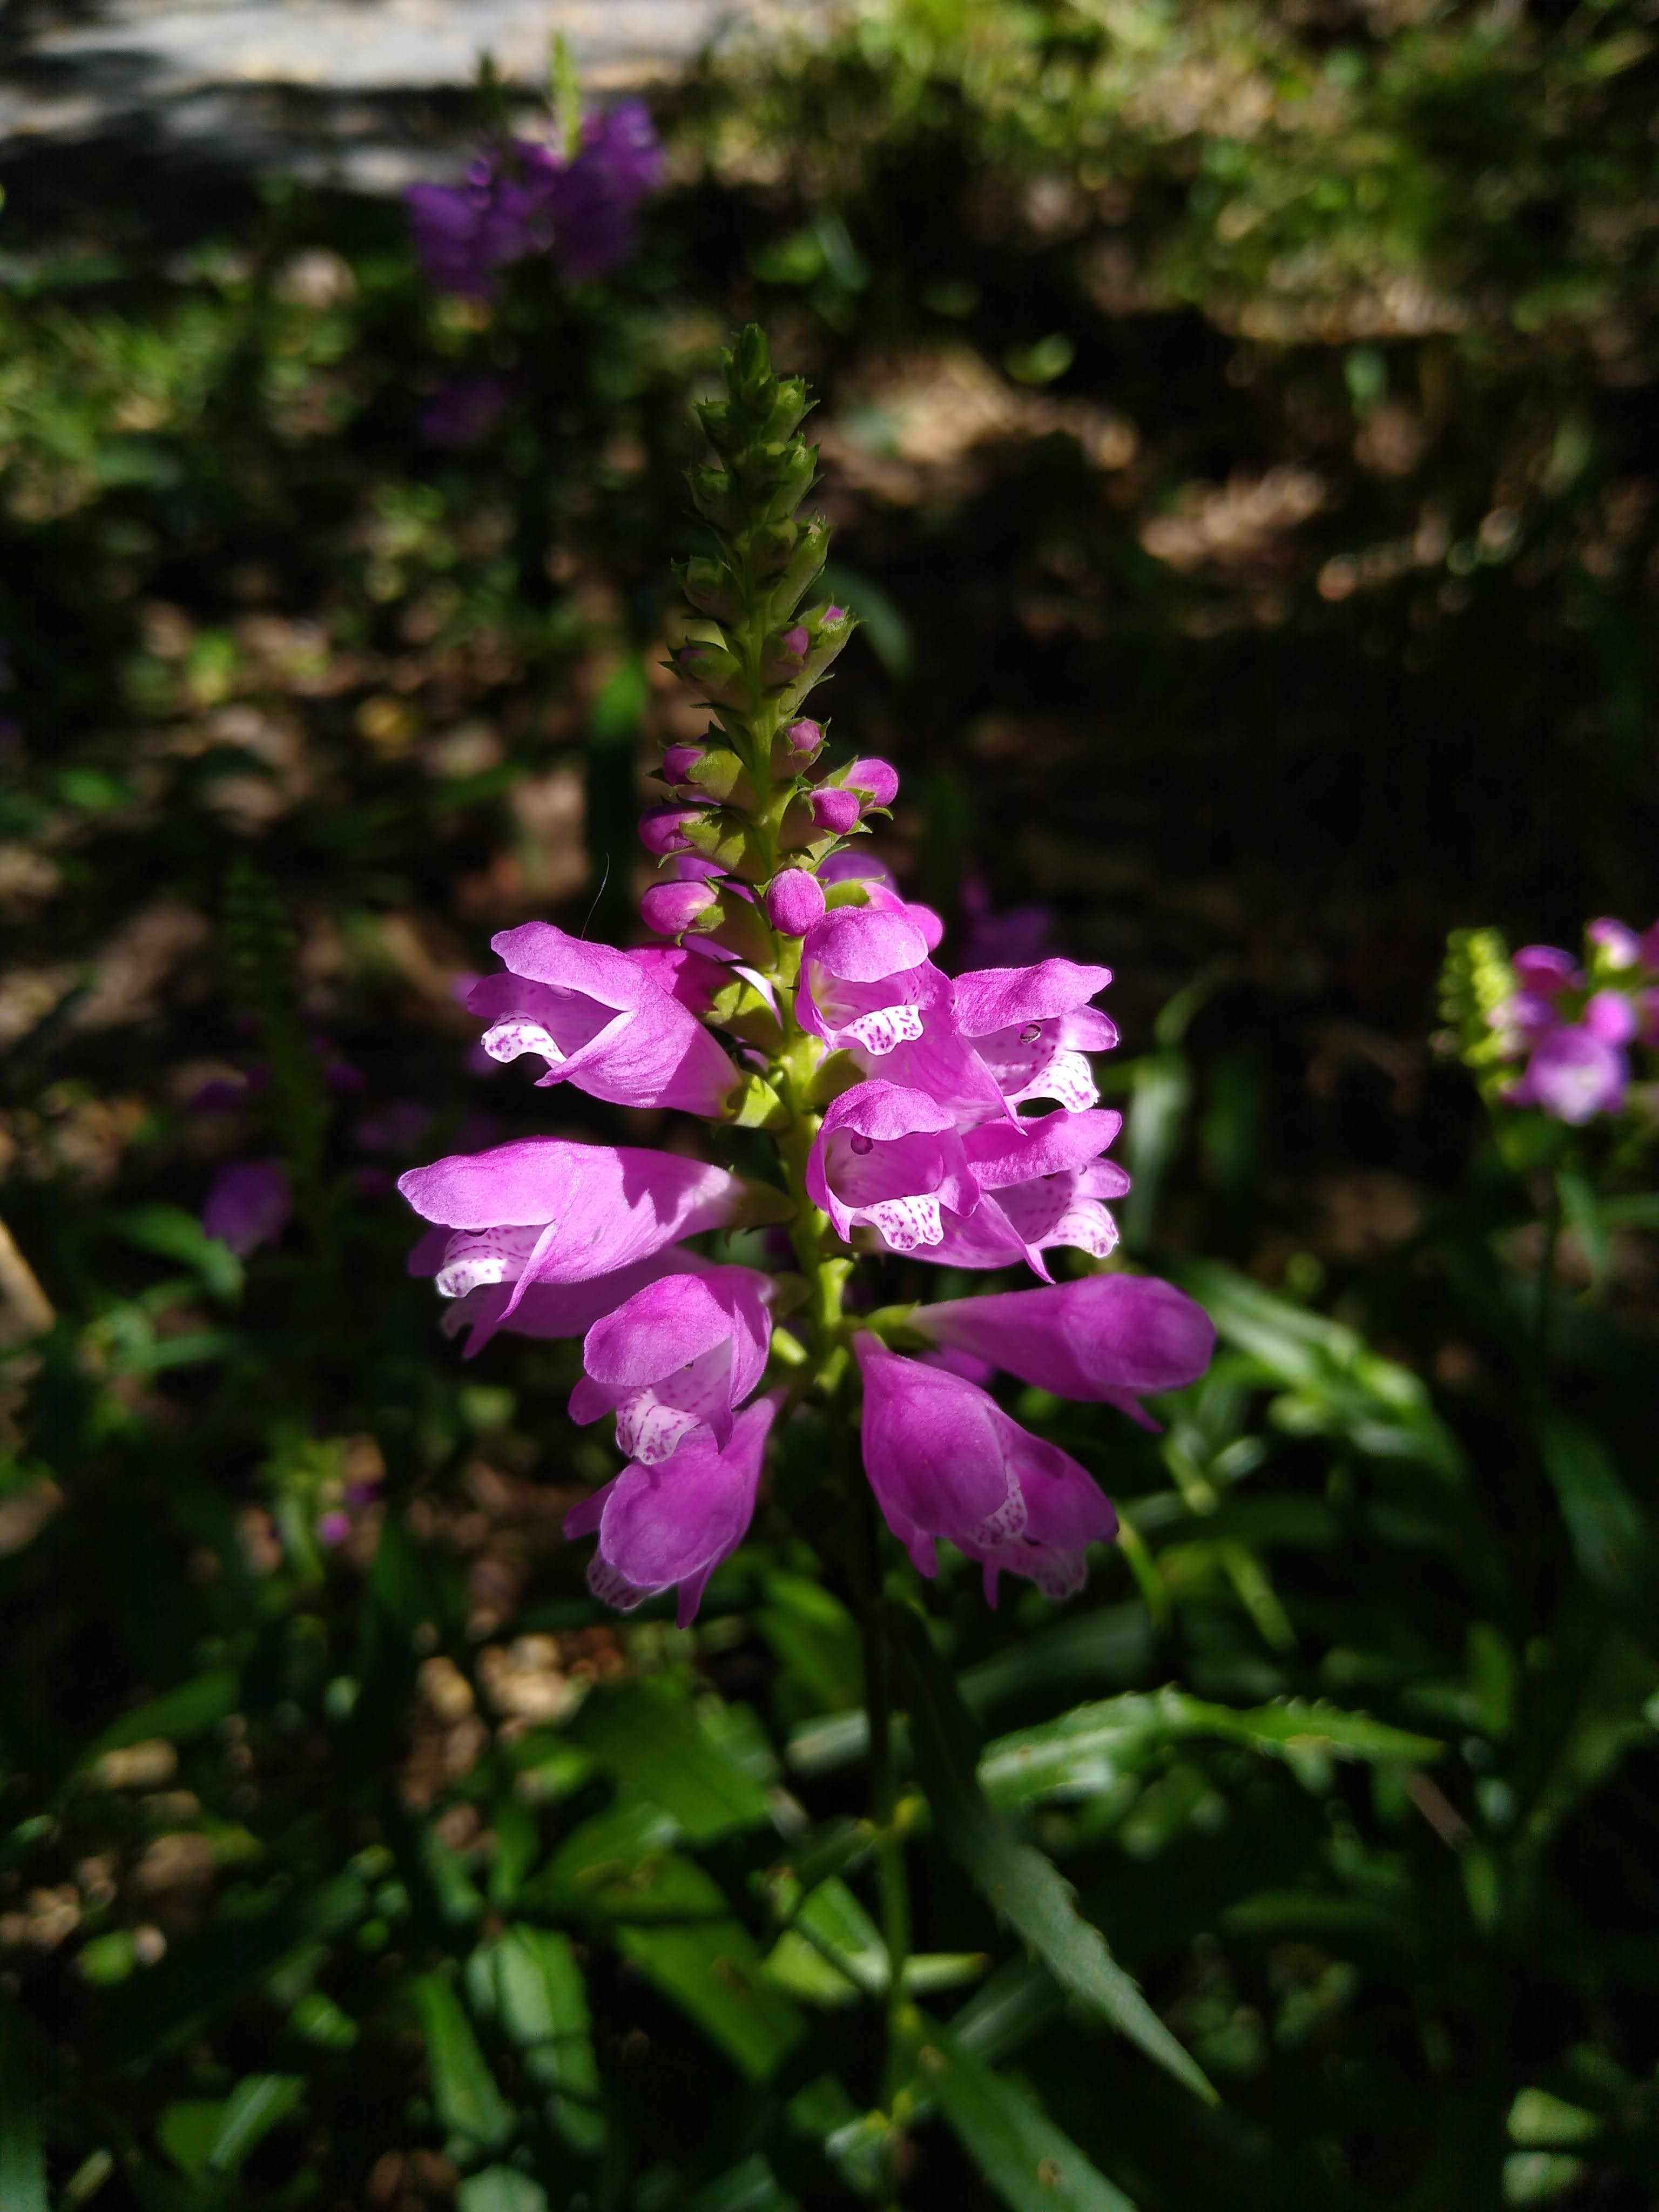 Spike of purple flowers in a shady woodland